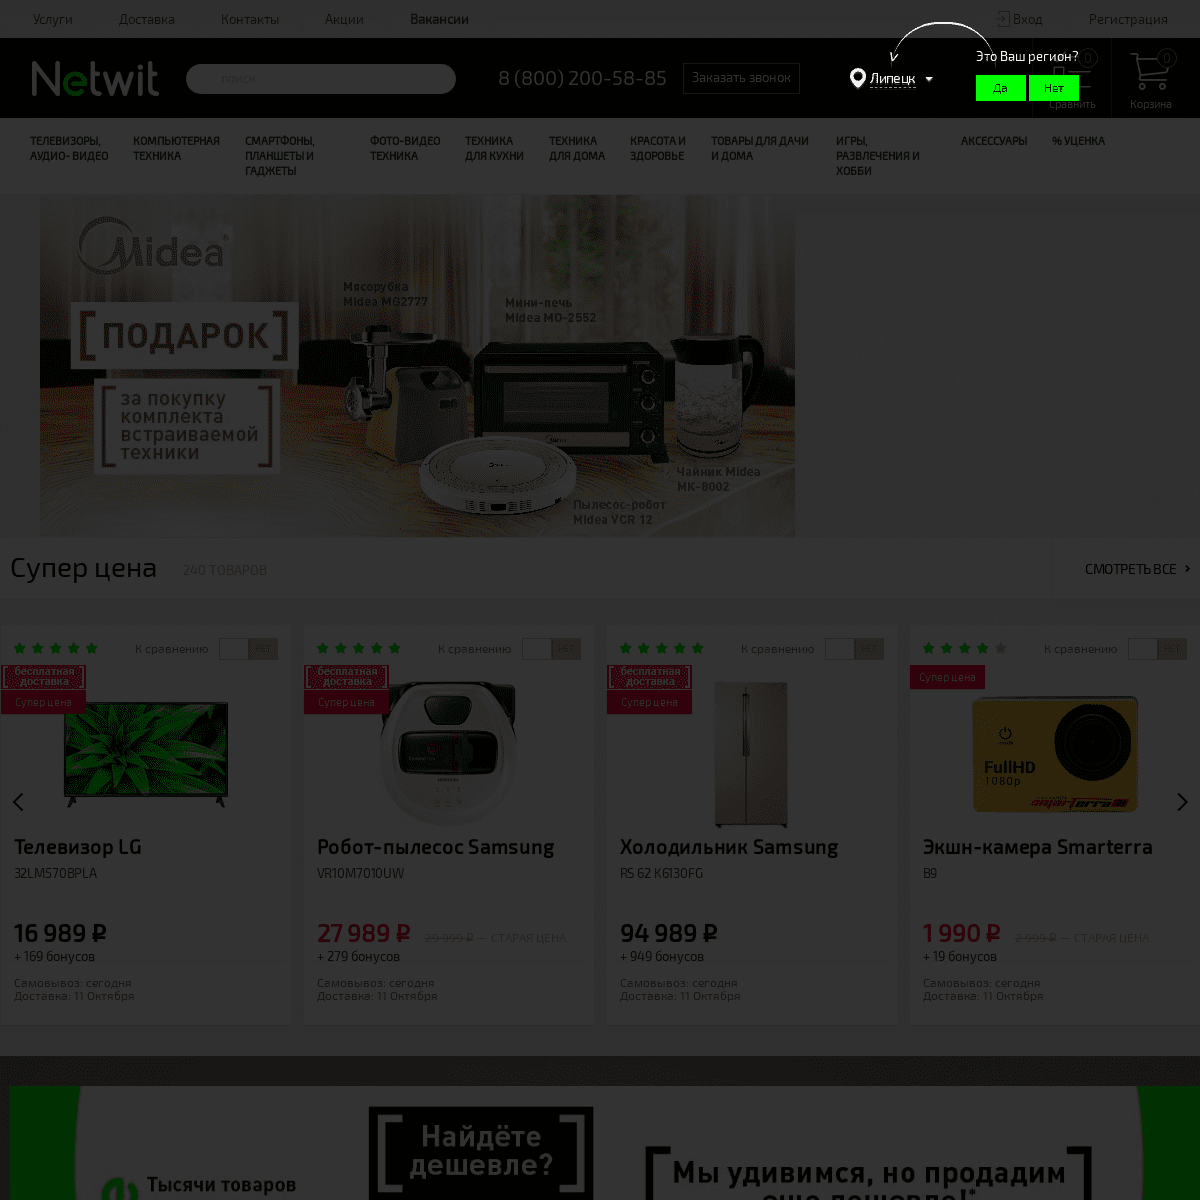 A complete backup of netwit.ru